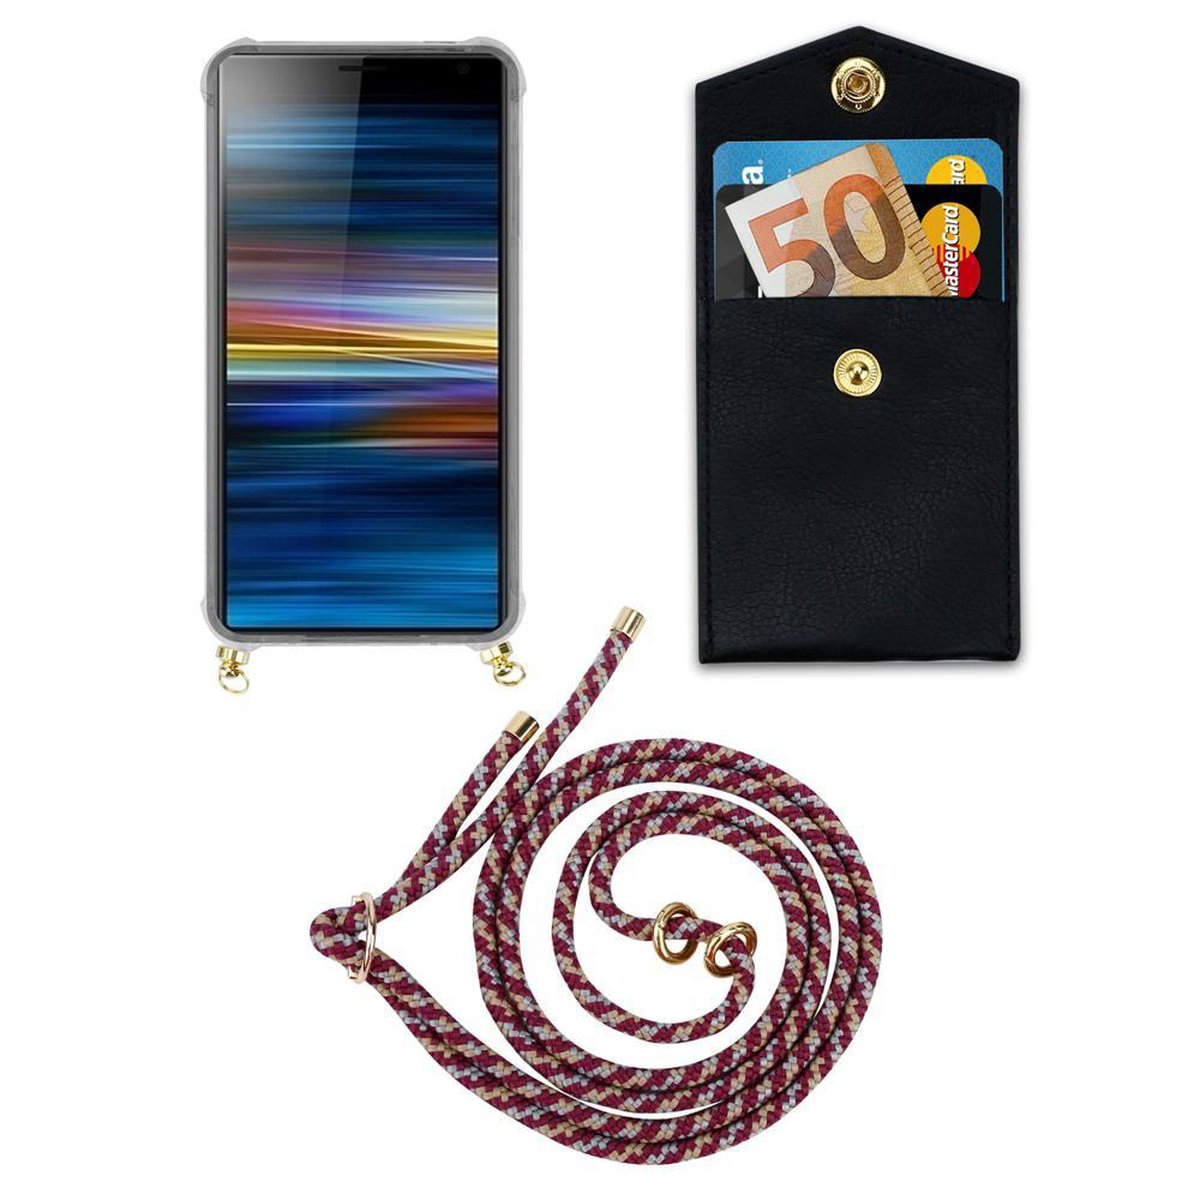 Hülle, mit CADORABO WEIß Sony, Ringen, Kette und Band PLUS, abnehmbarer Xperia GELB Backcover, Gold ROT Handy 10 Kordel